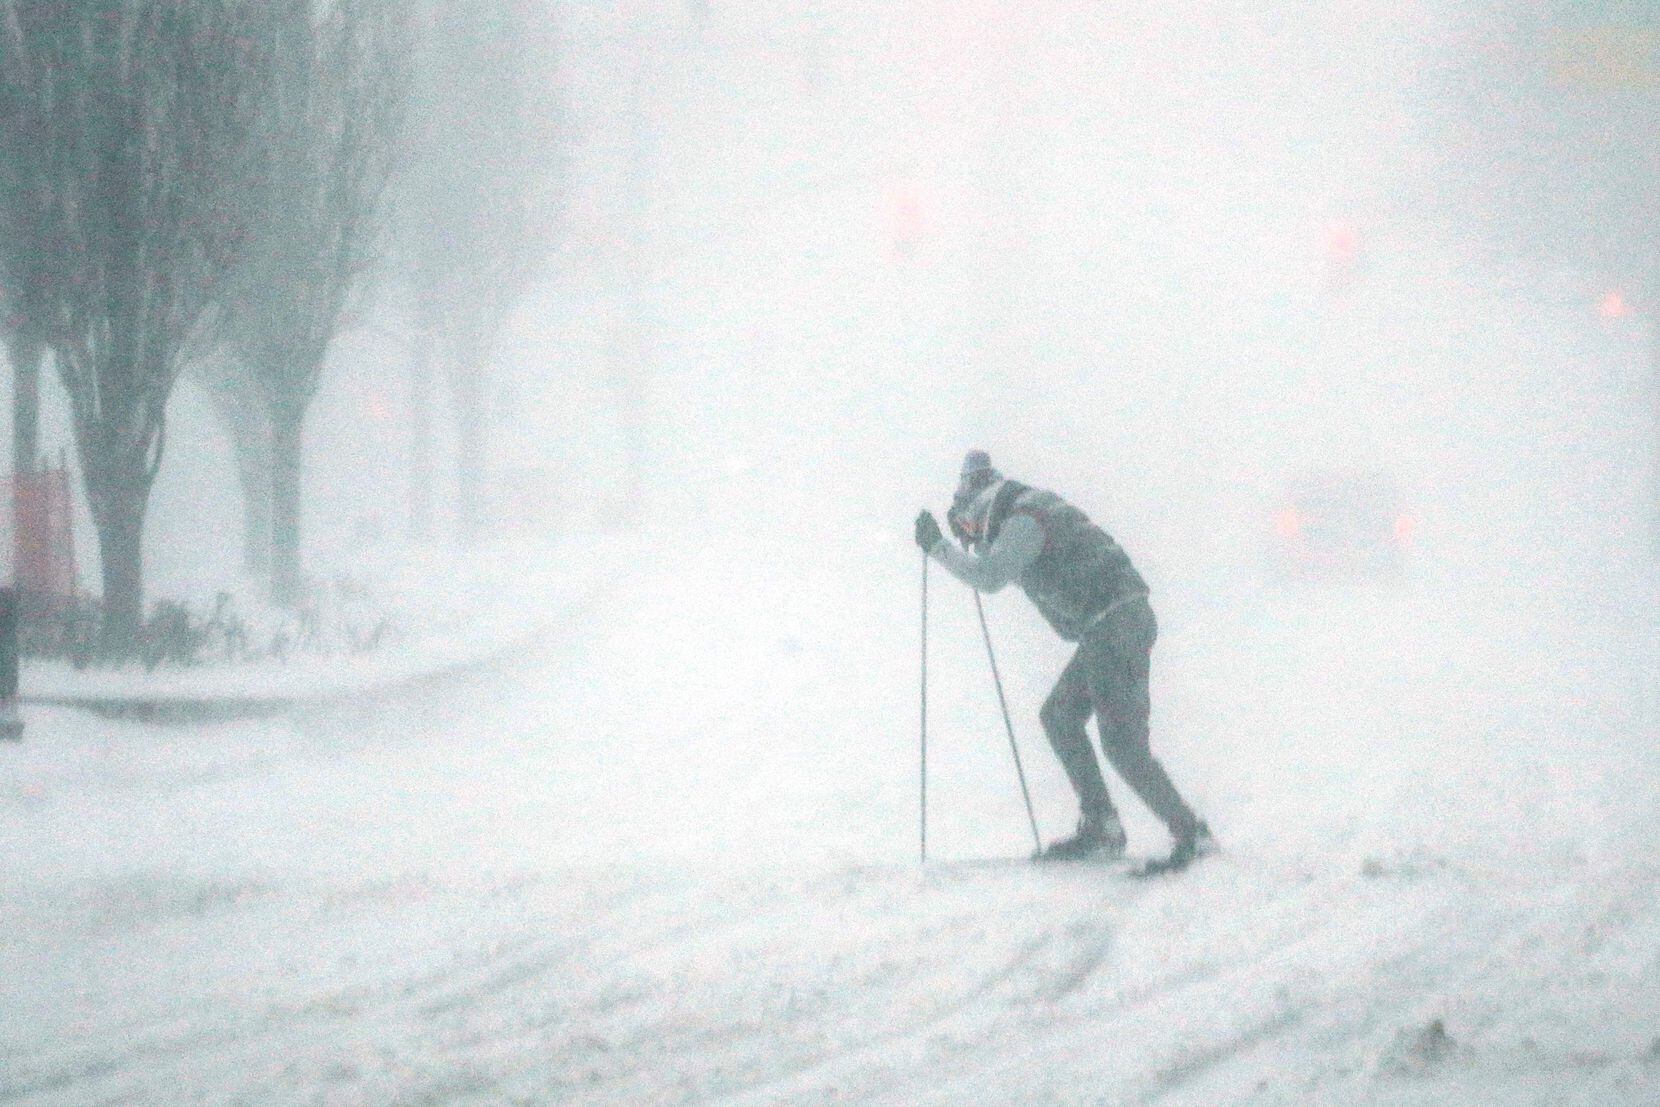 8 lessons learned from being buried by a blizzard of snow photos.